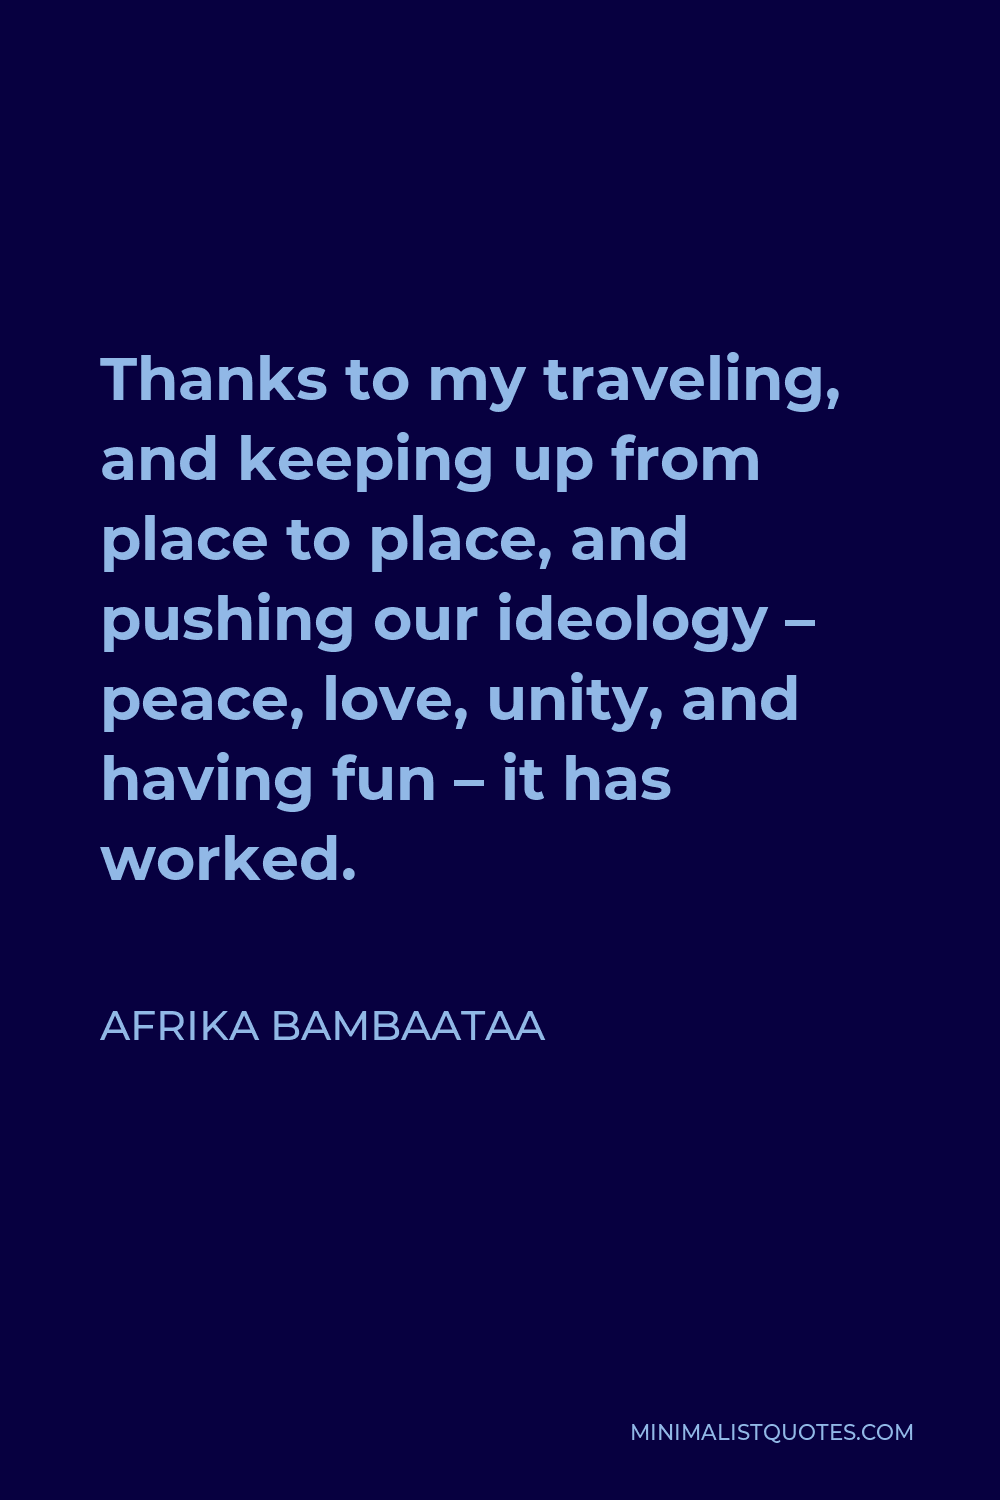 Afrika Bambaataa Quote - Thanks to my traveling, and keeping up from place to place, and pushing our ideology – peace, love, unity, and having fun – it has worked.